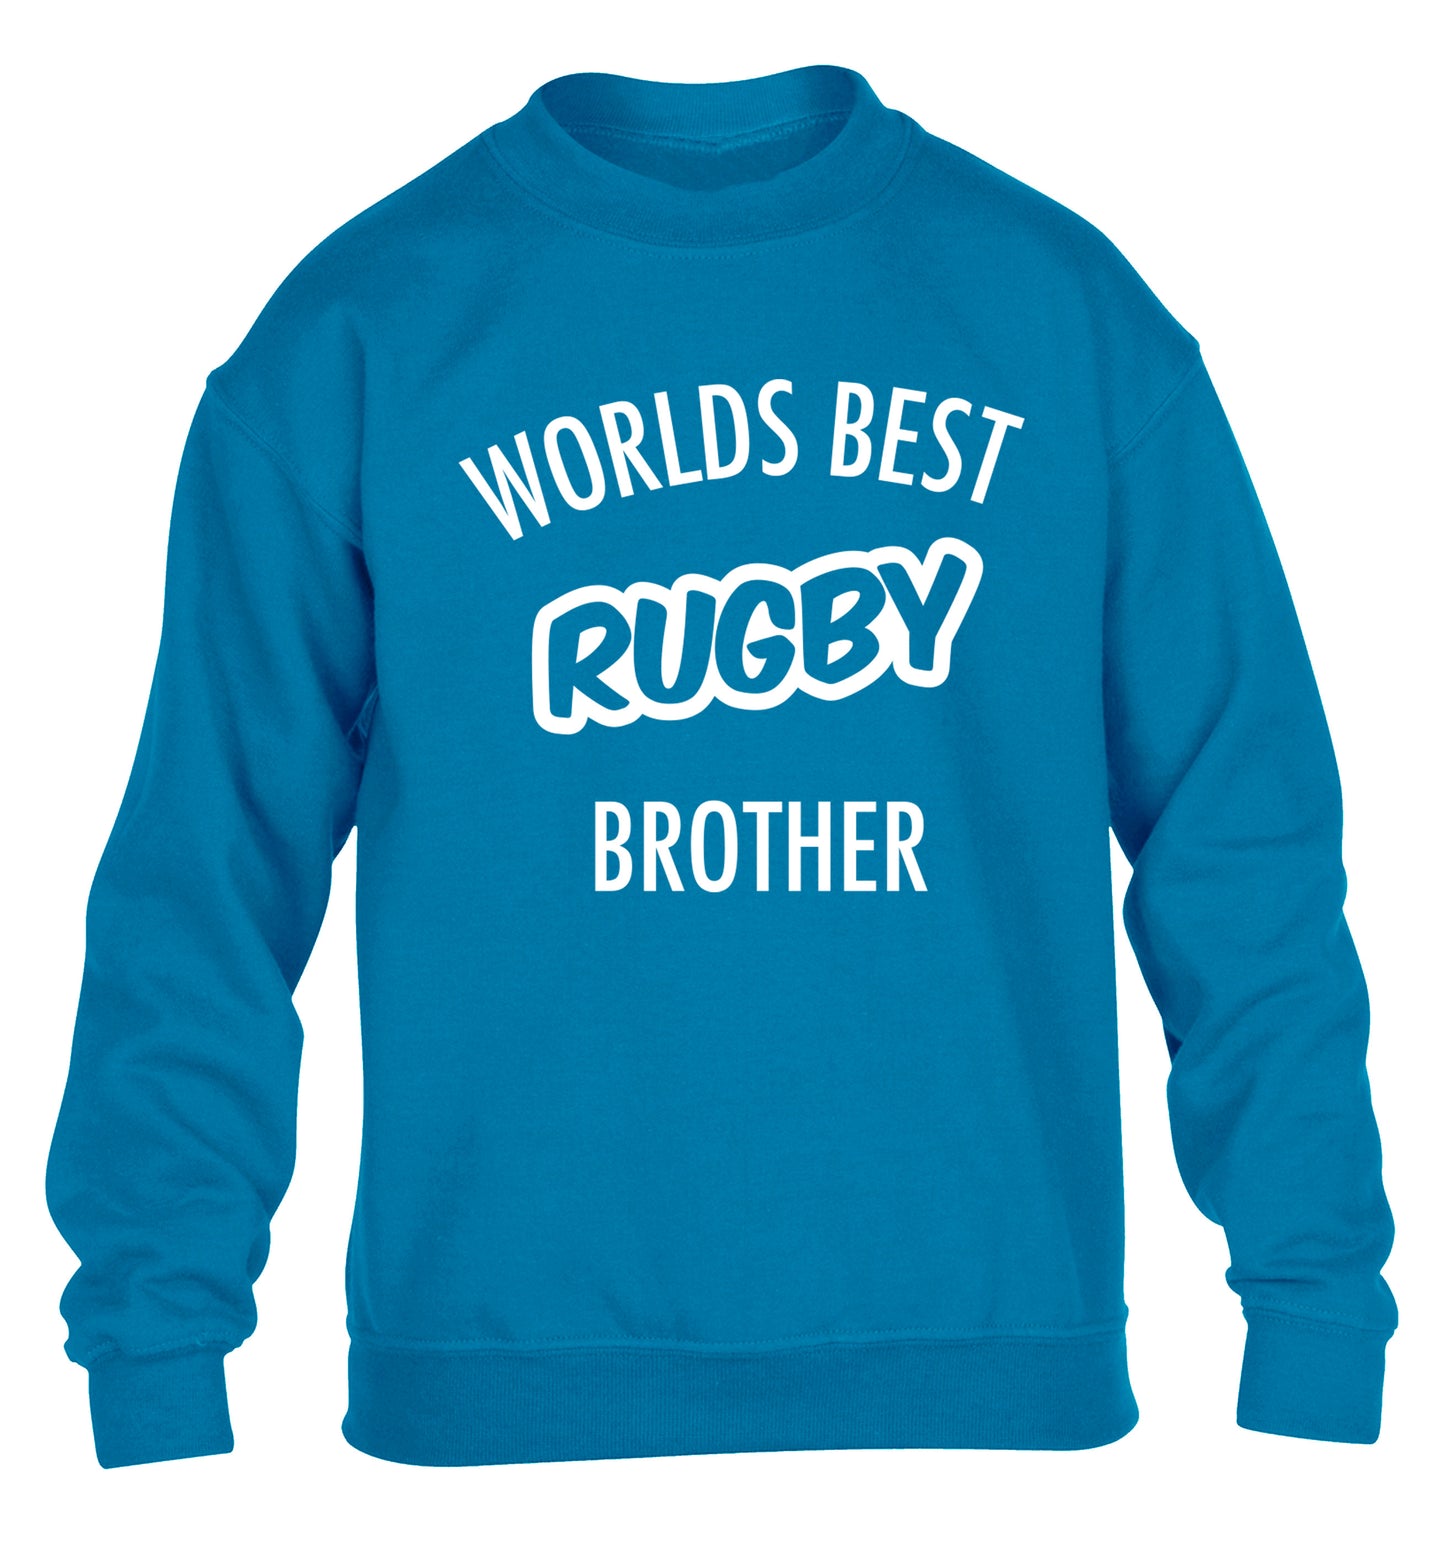 Worlds best rugby brother children's blue sweater 12-13 Years